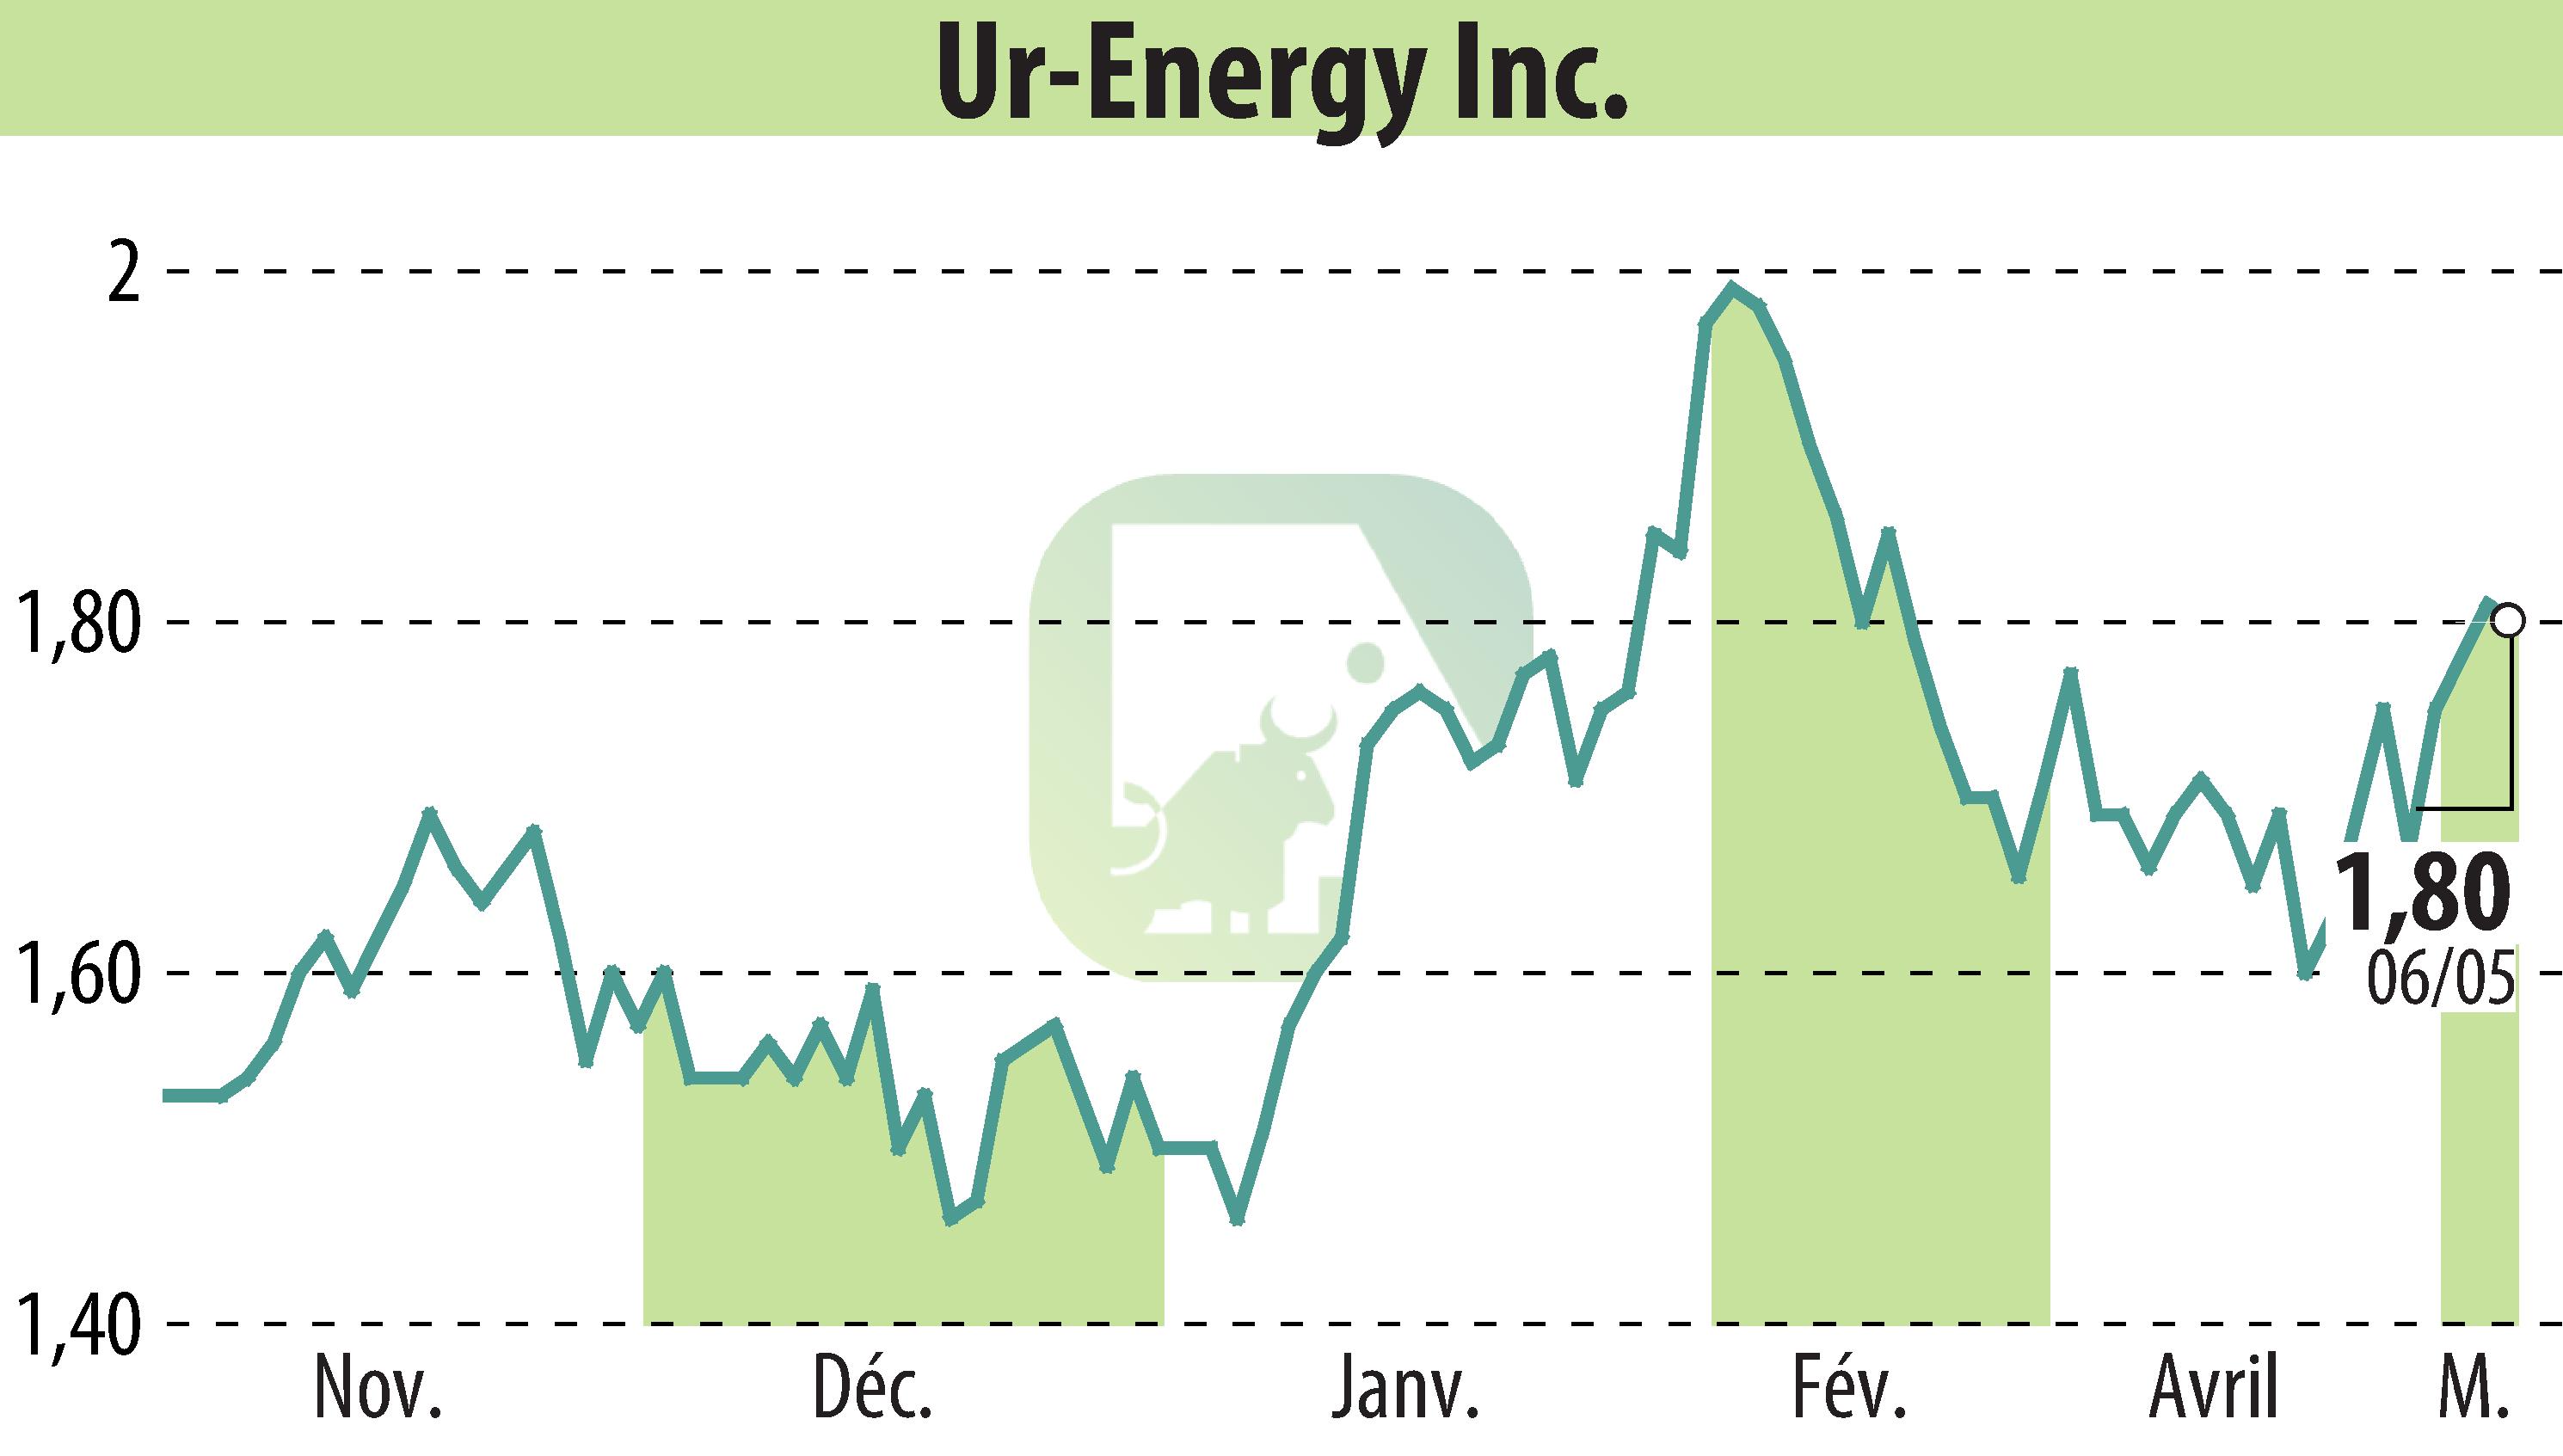 Stock price chart of Ur-Energy Inc. (EBR:URG) showing fluctuations.